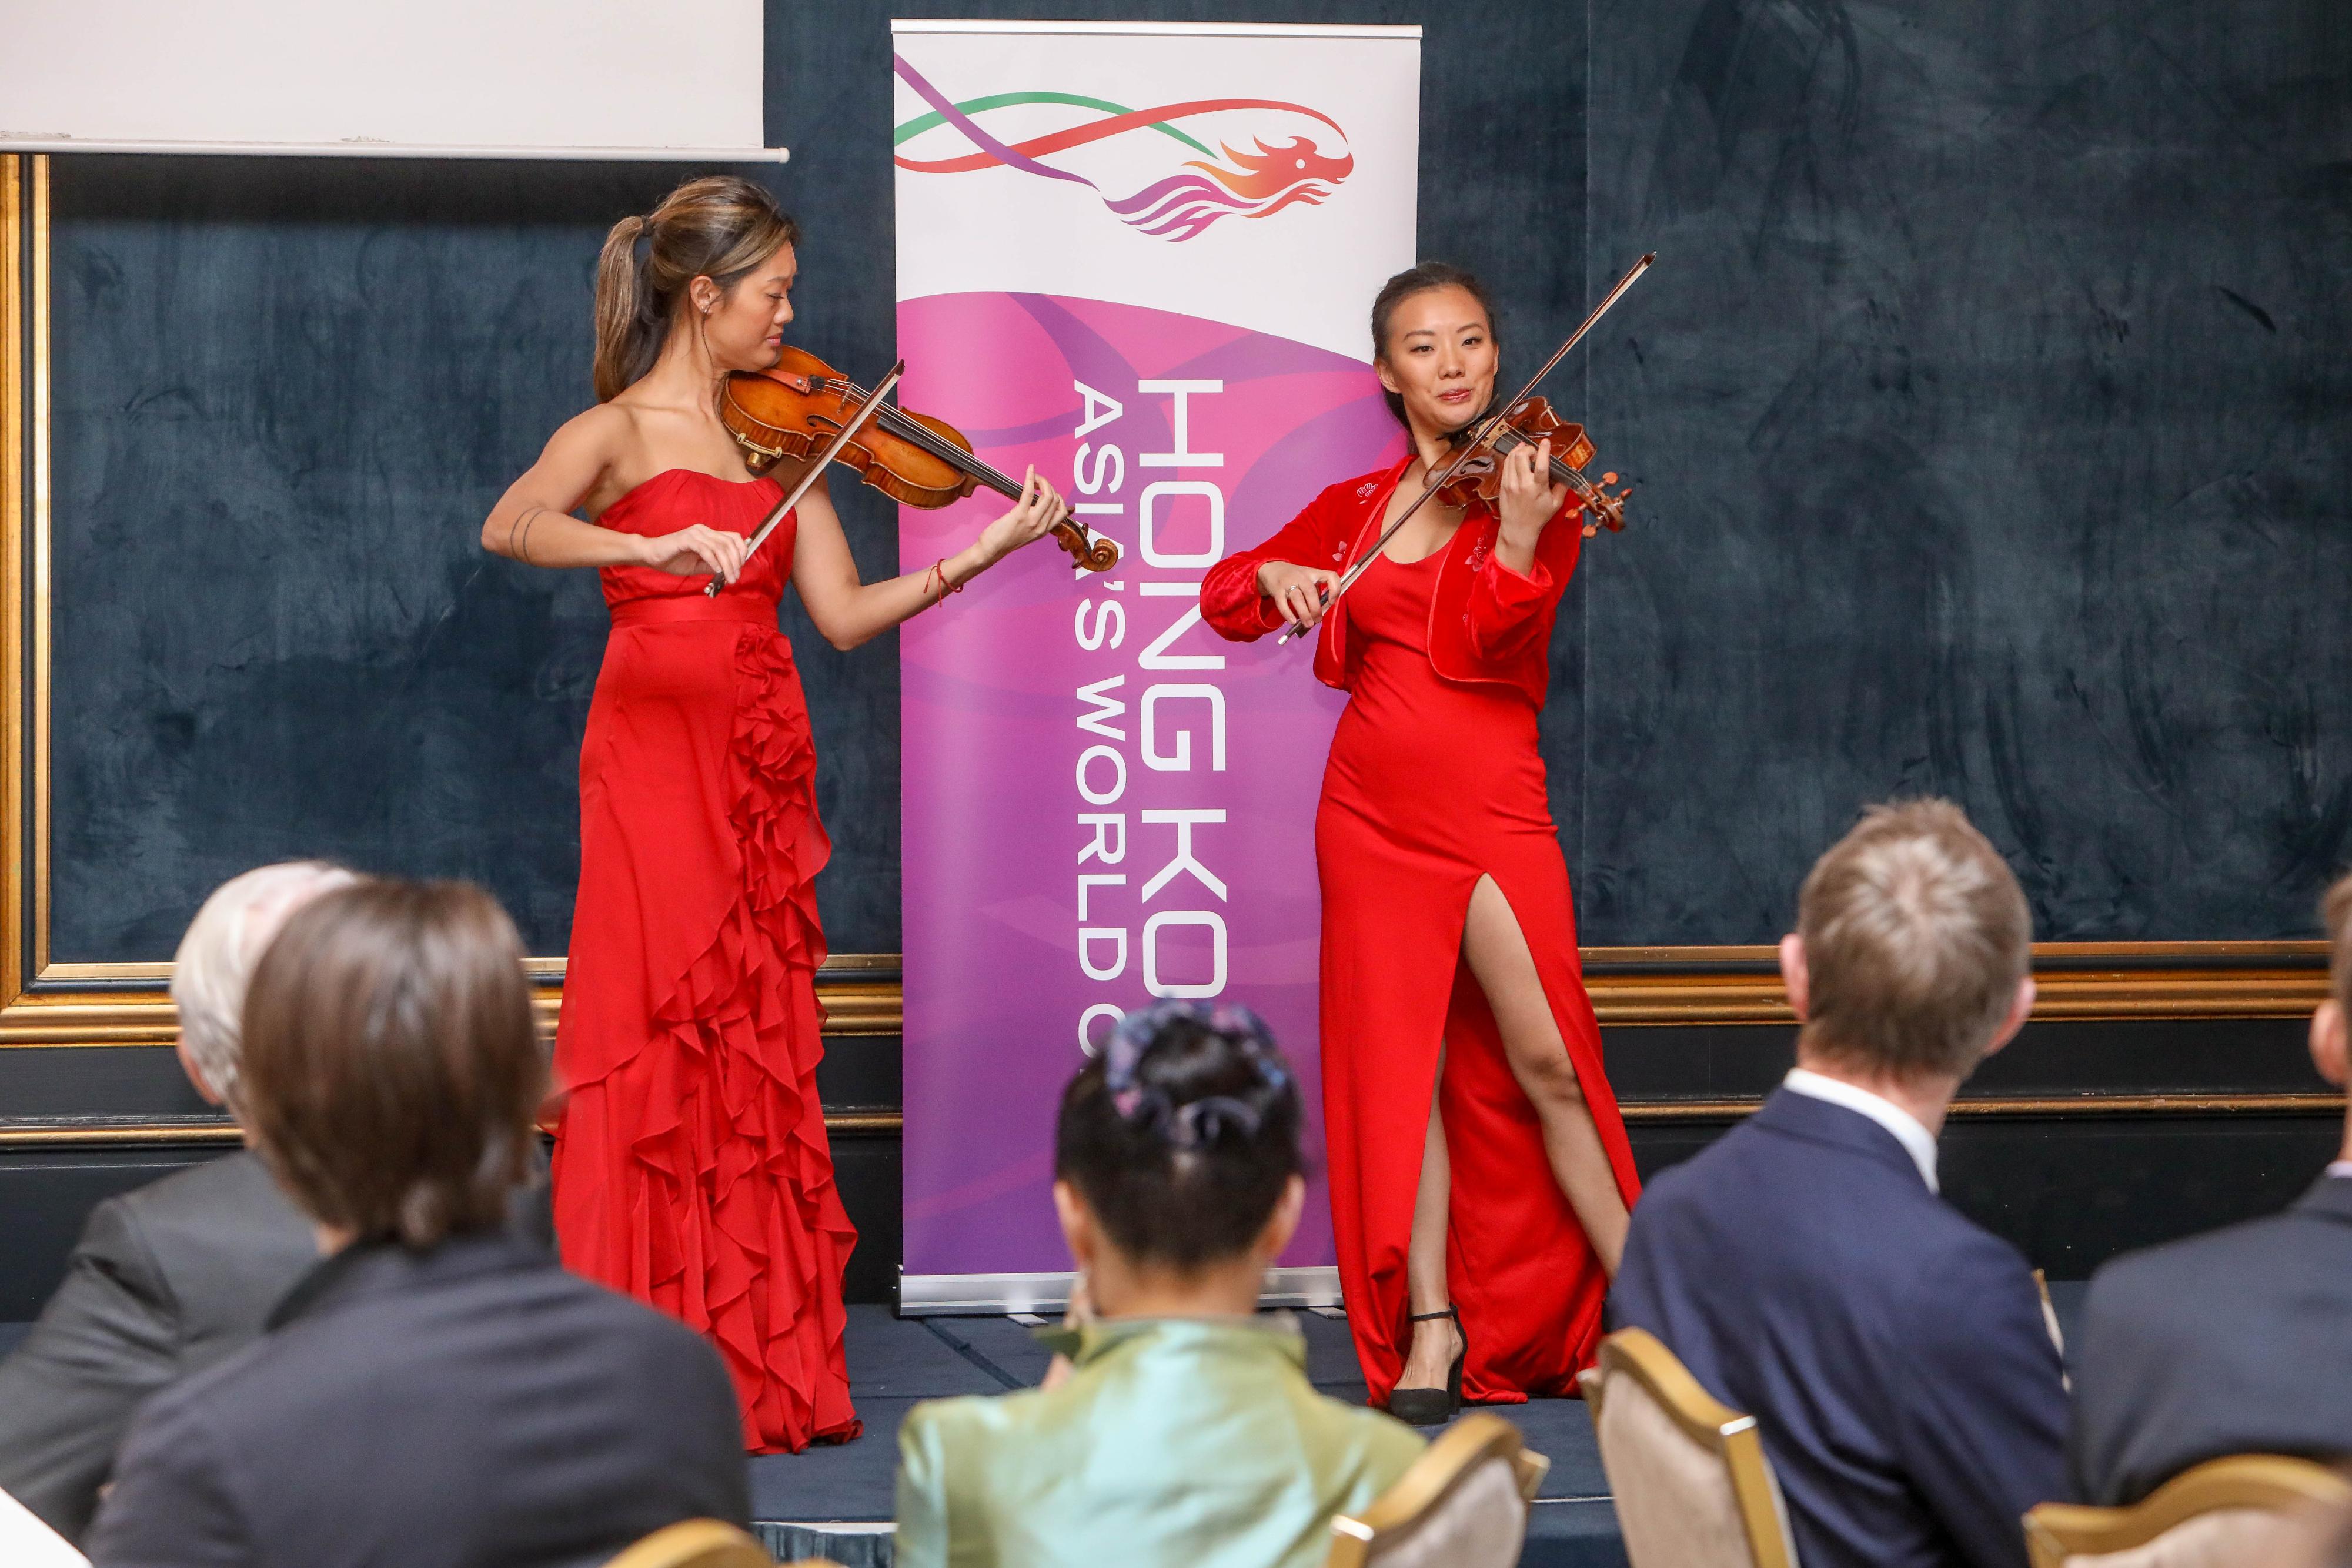 The Hong Kong Economic and Trade Office, London co-hosted receptions in Oslo, Norway, and Helsinki, Finland, with local business associations on January 30 and February 1 respectively for celebrating the Year of the Rabbit. Photo shows the violin performance at the Oslo reception.